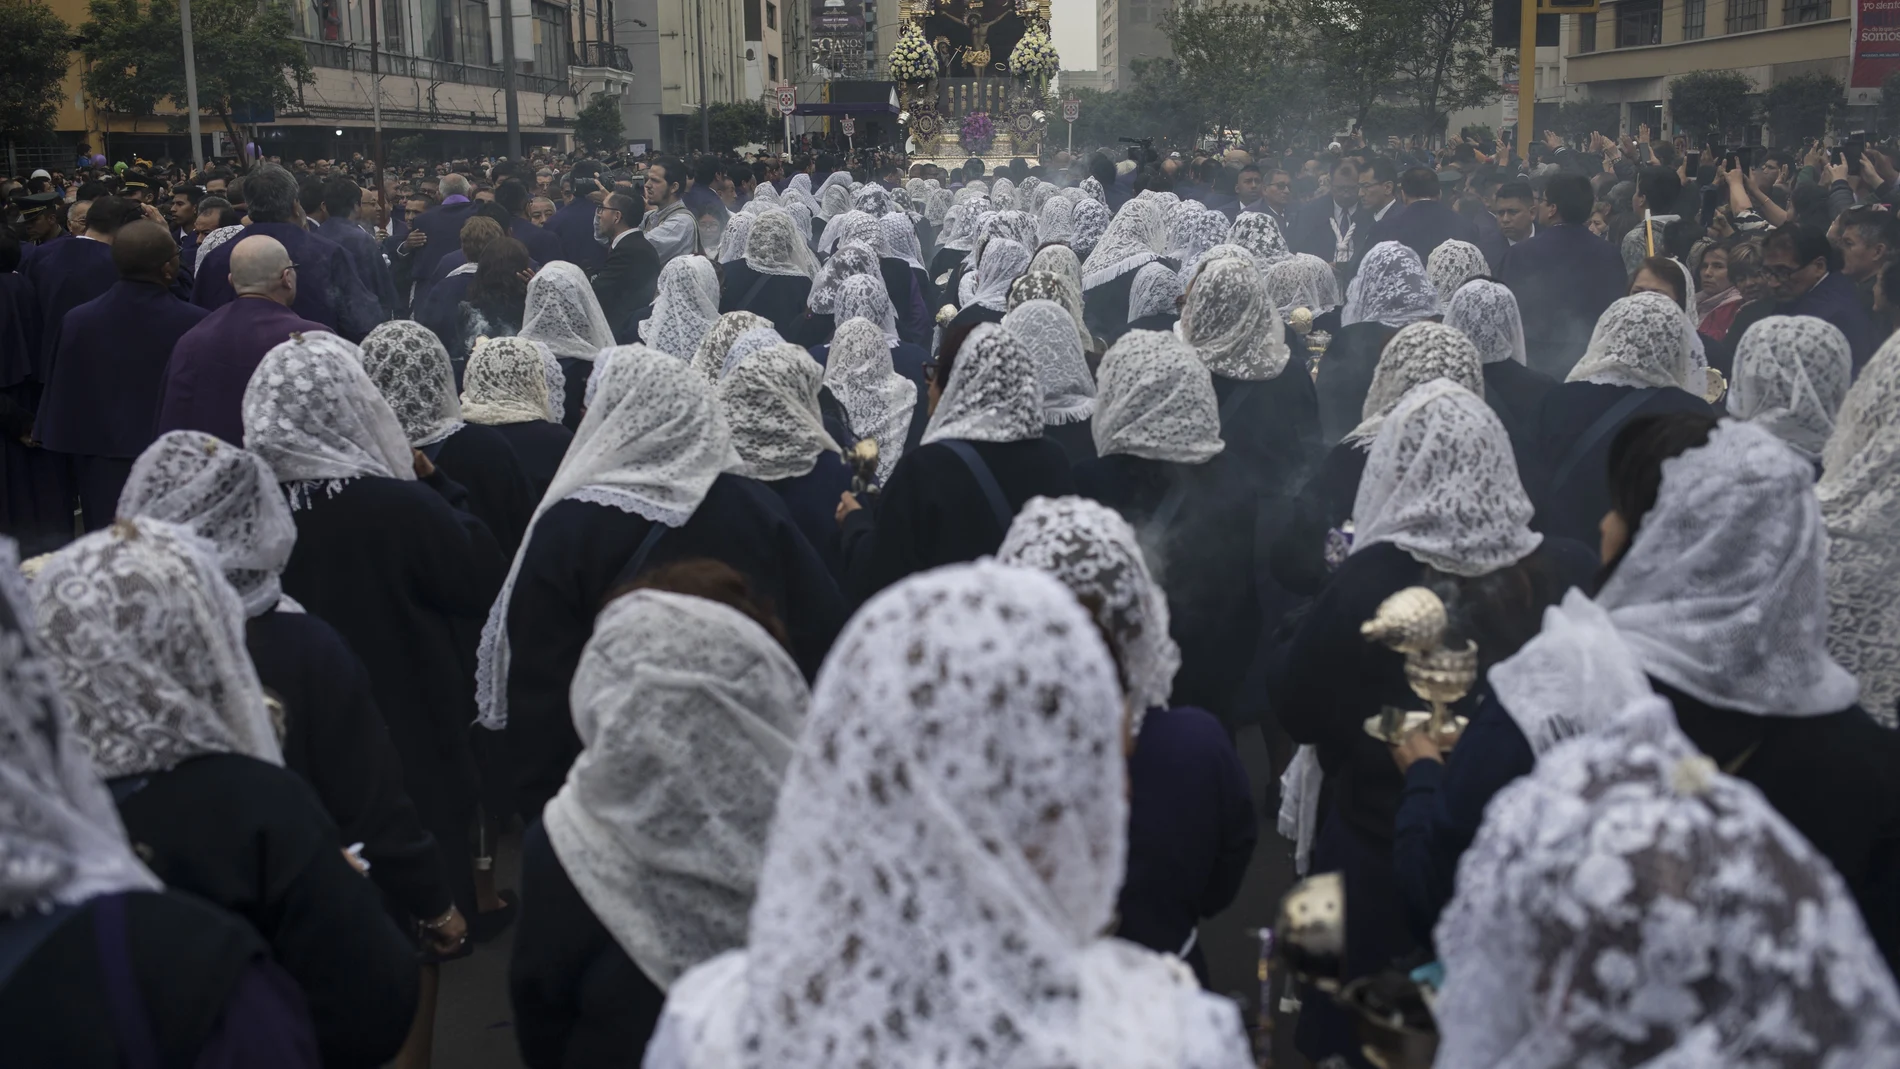 FILE - in this Oct. 18, 2019 file photo, faithful take part in a procession honoring The Lord of Miracles, the patron saint of Lima, Peru. The 2020 procession of The Lord of Miracles has been canceled as a measure to curb the spread of the new coronavirus. (AP Photo/Rodrigo Abd, File)